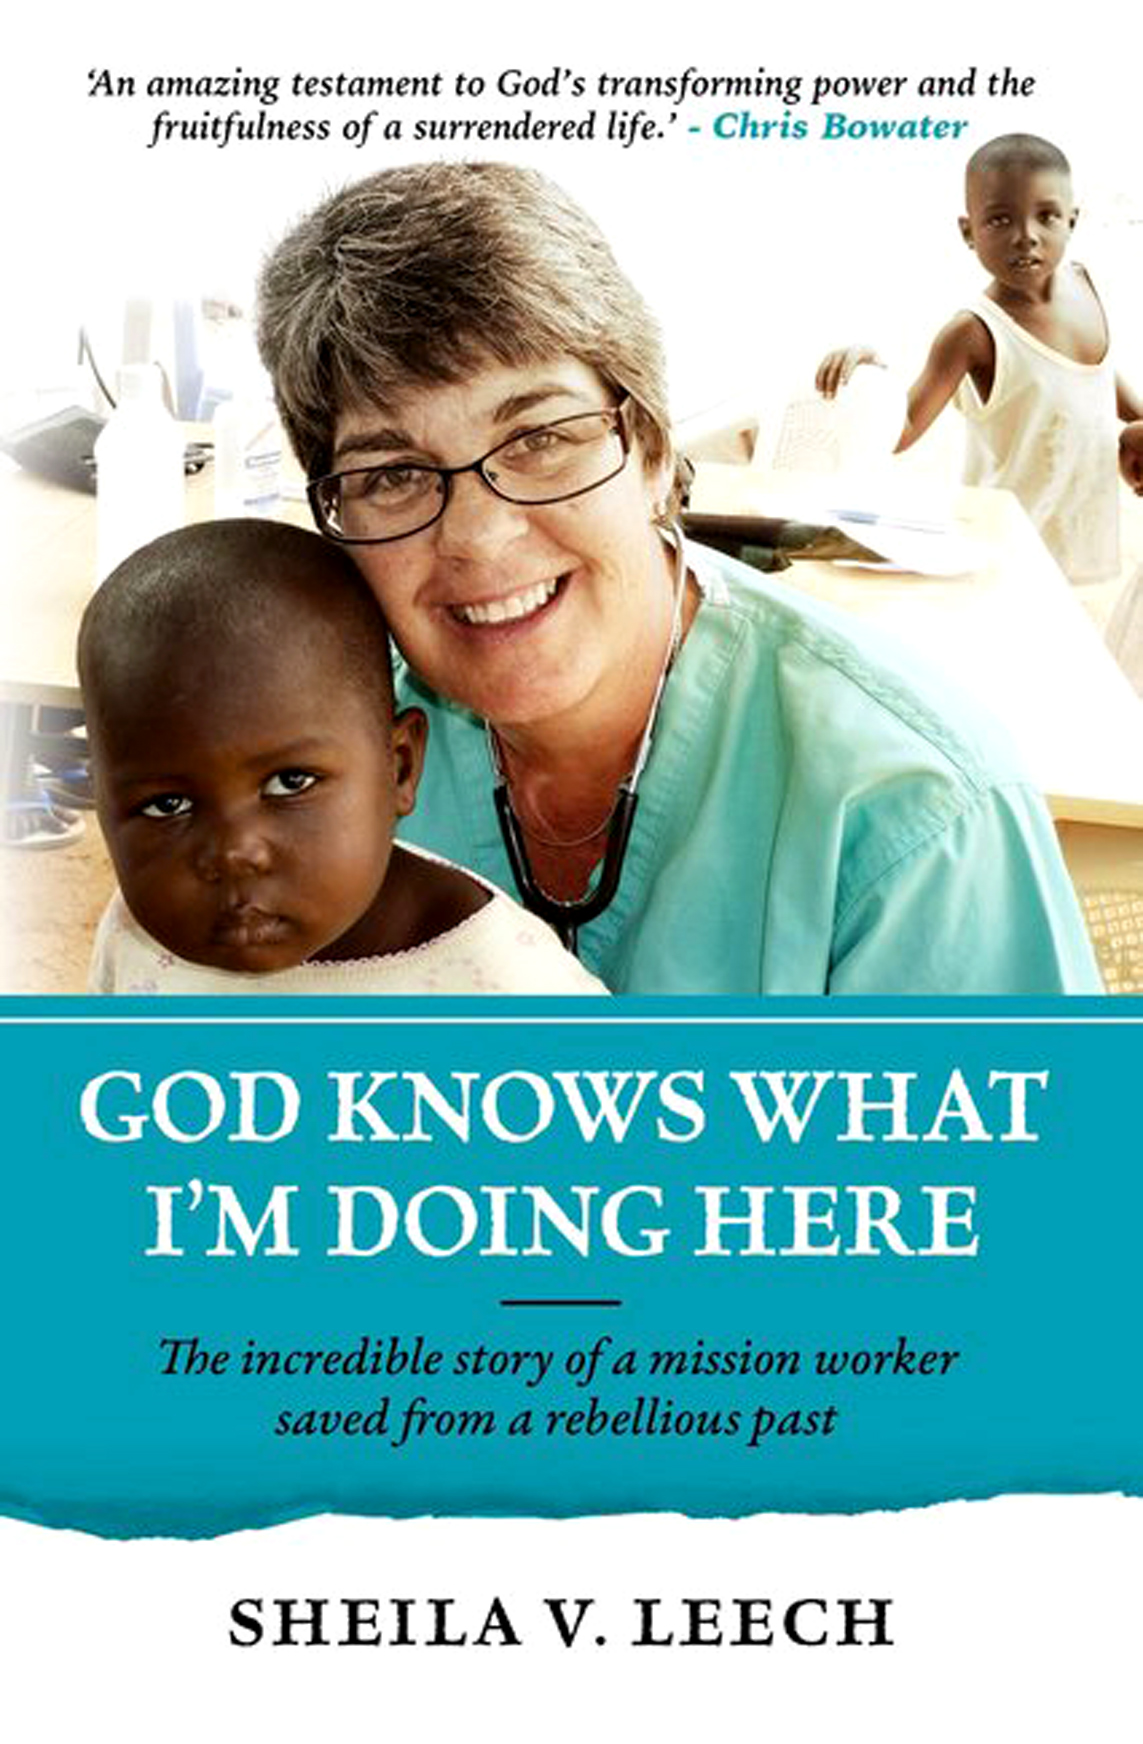 Sheila Leech's first book was released on Sept. 1.